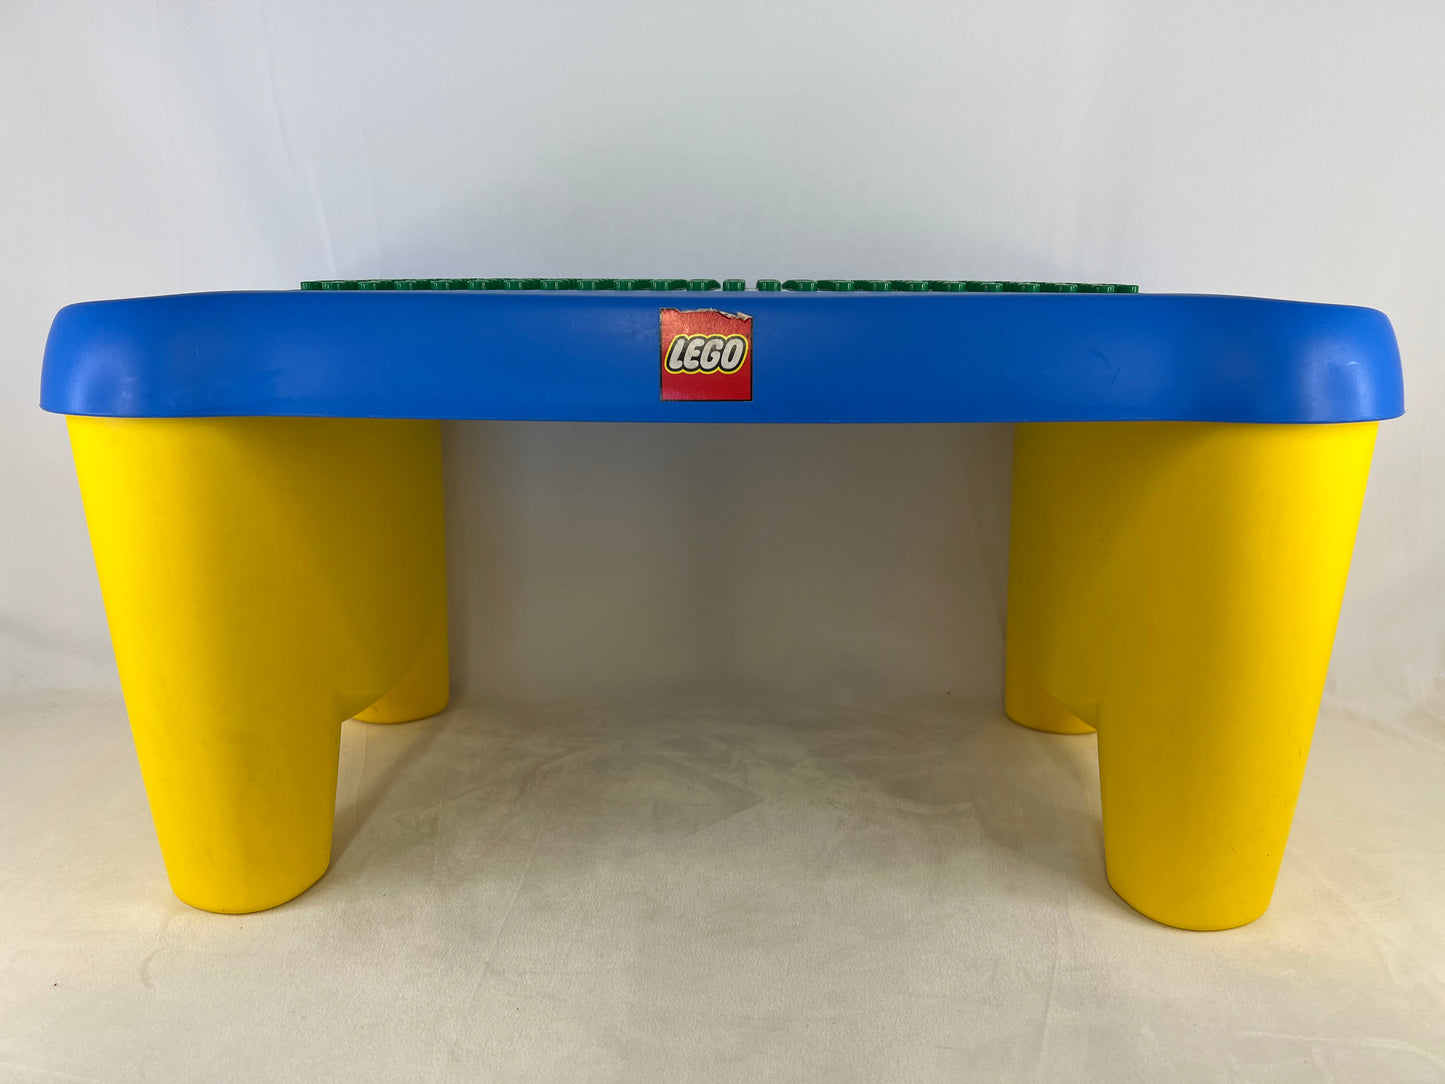 Lego Vintage Duplo Lap Table Fits Lego Duplo or Primo Dimensions 9.5 x 14.2 x 25.8 inches Excellent Condition